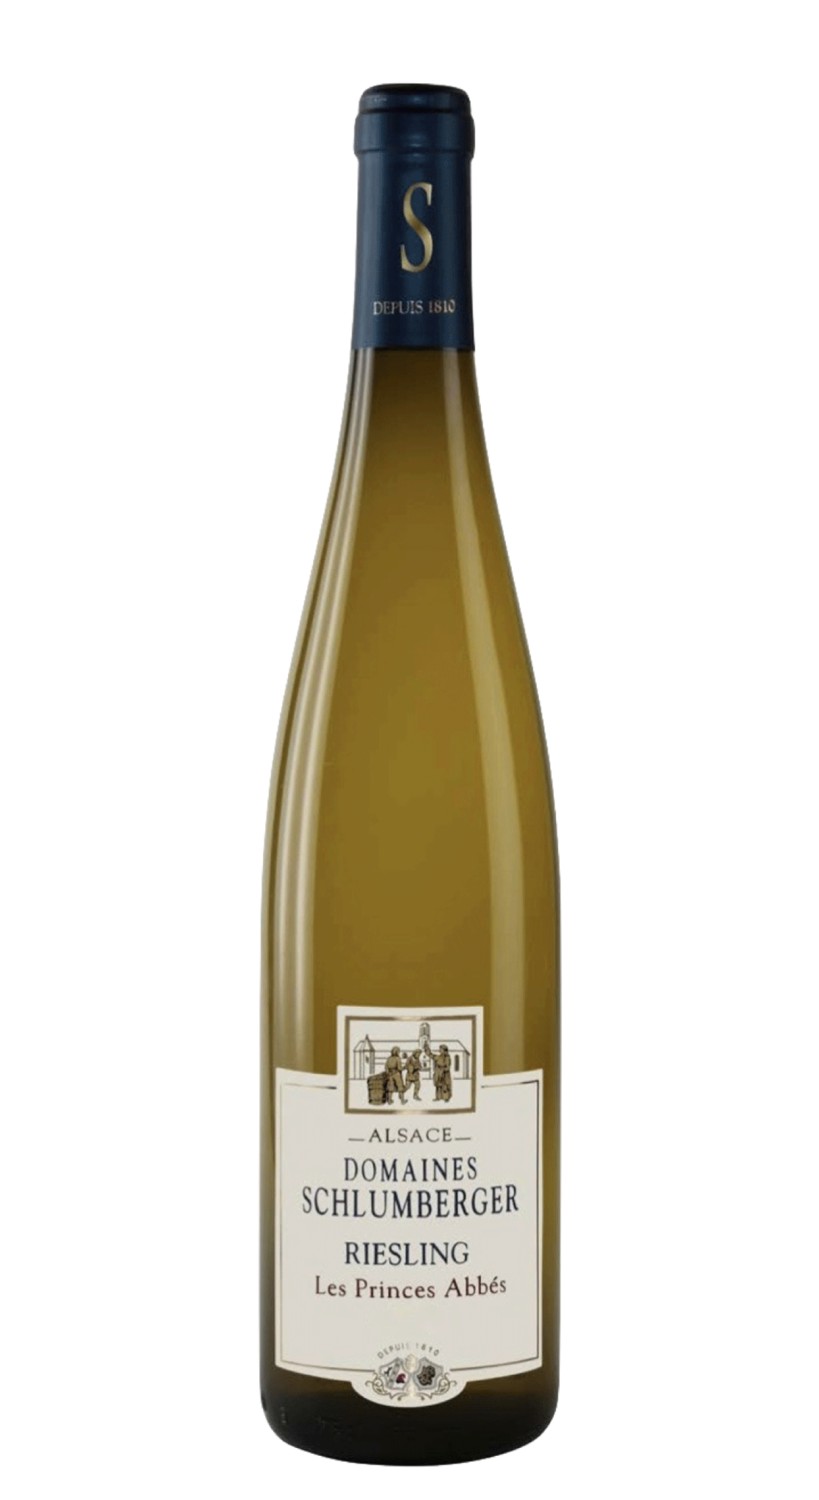 Les Princes Abbes 2020 (Riesling) ; Schlumberger - 75cl